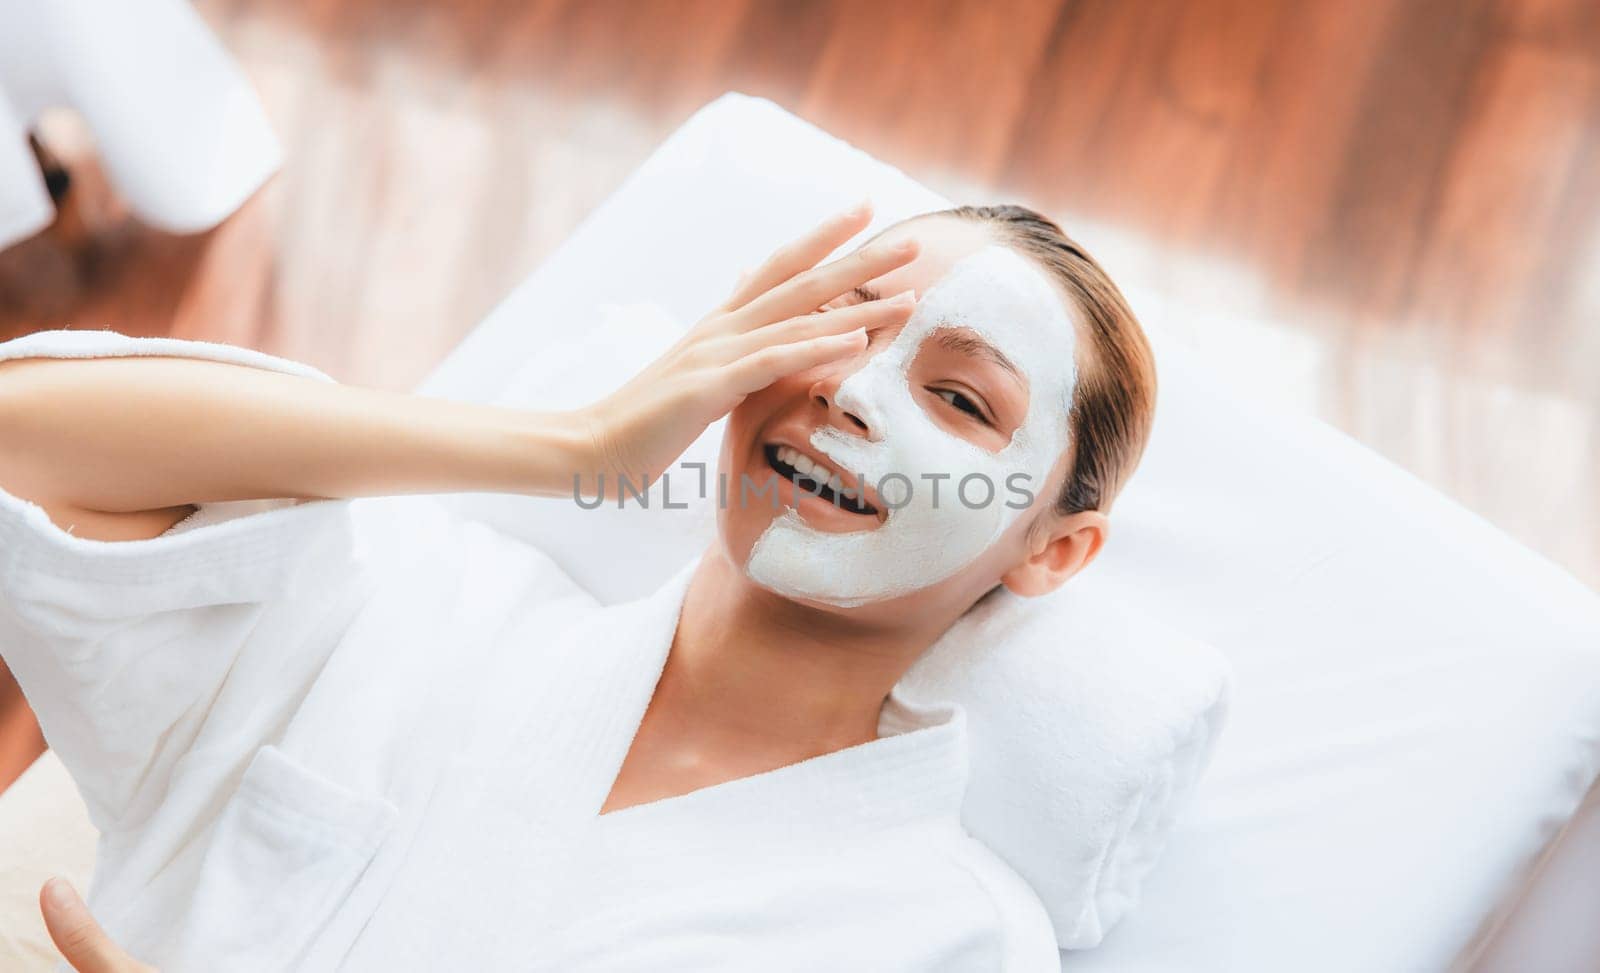 Serene daylight ambiance of spa salon, top view woman lying on massage table smiling and rejuvenating with face cream spa massage. Facial skin spa treatment and beauty care concept. Quiescent